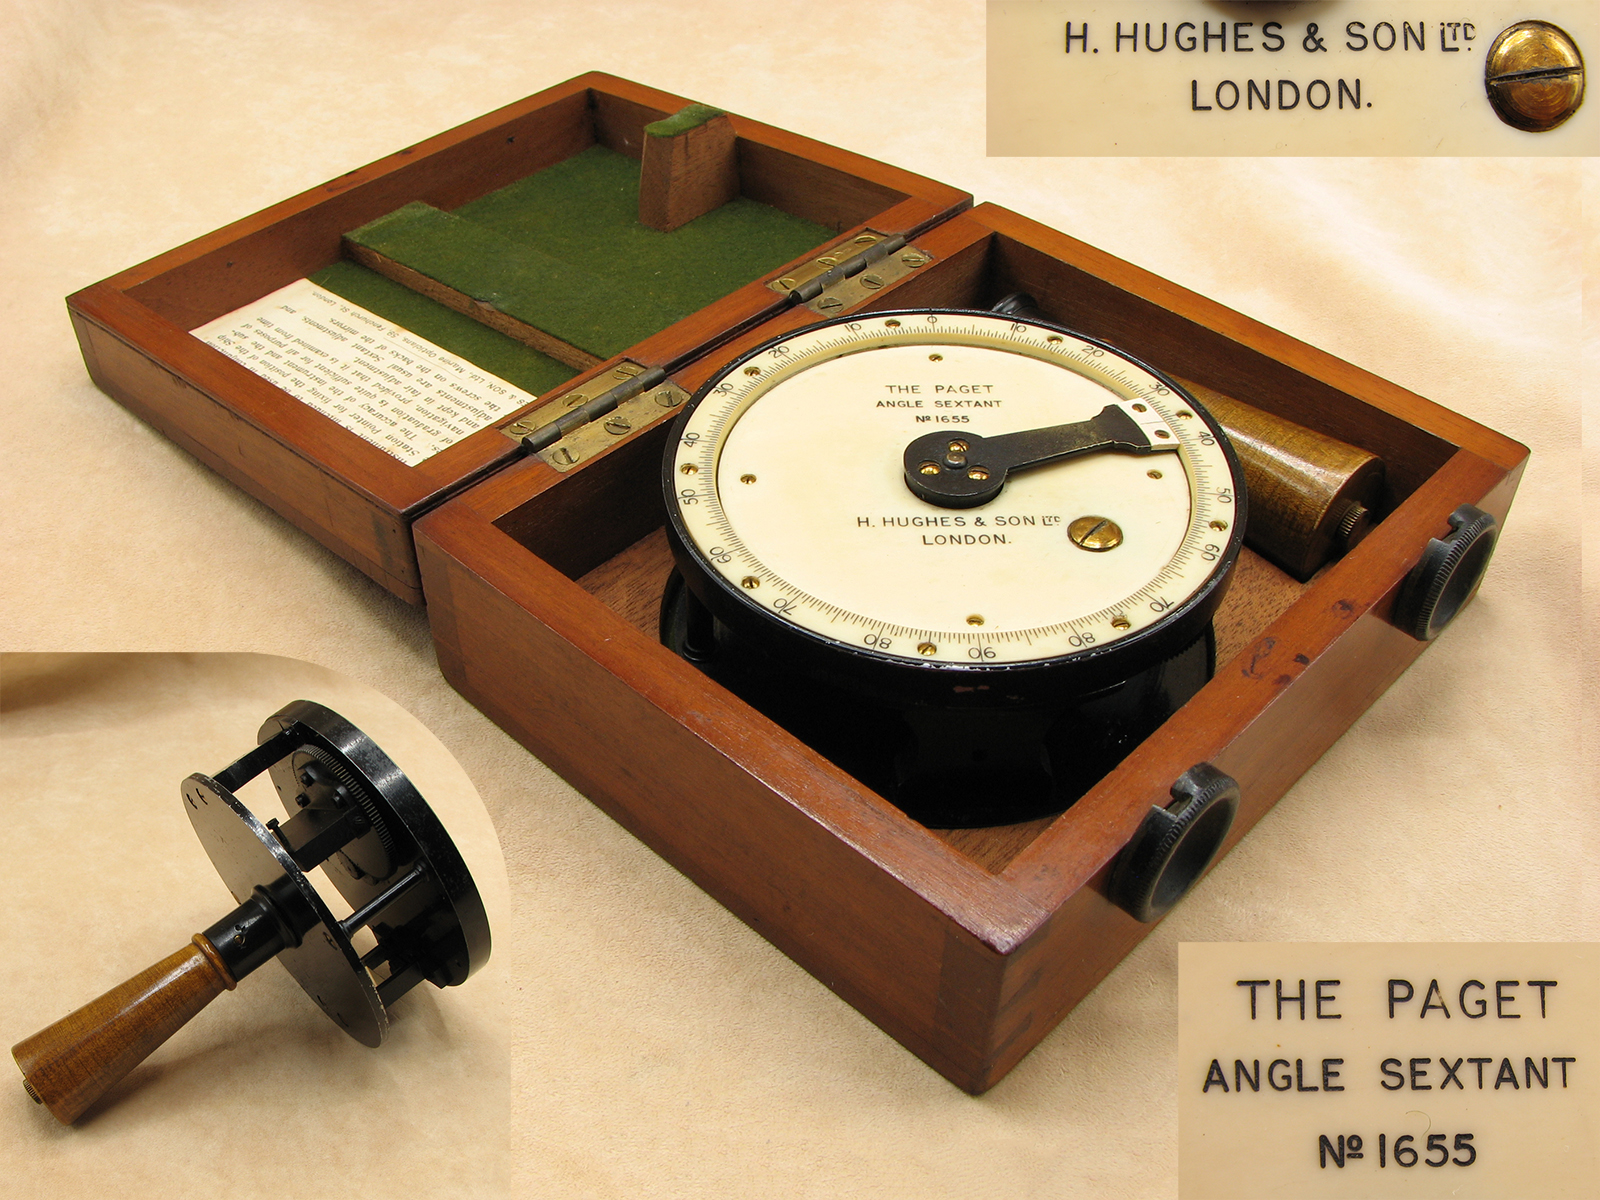 Henry Hughes & Son 'The Paget' angle sextant with case